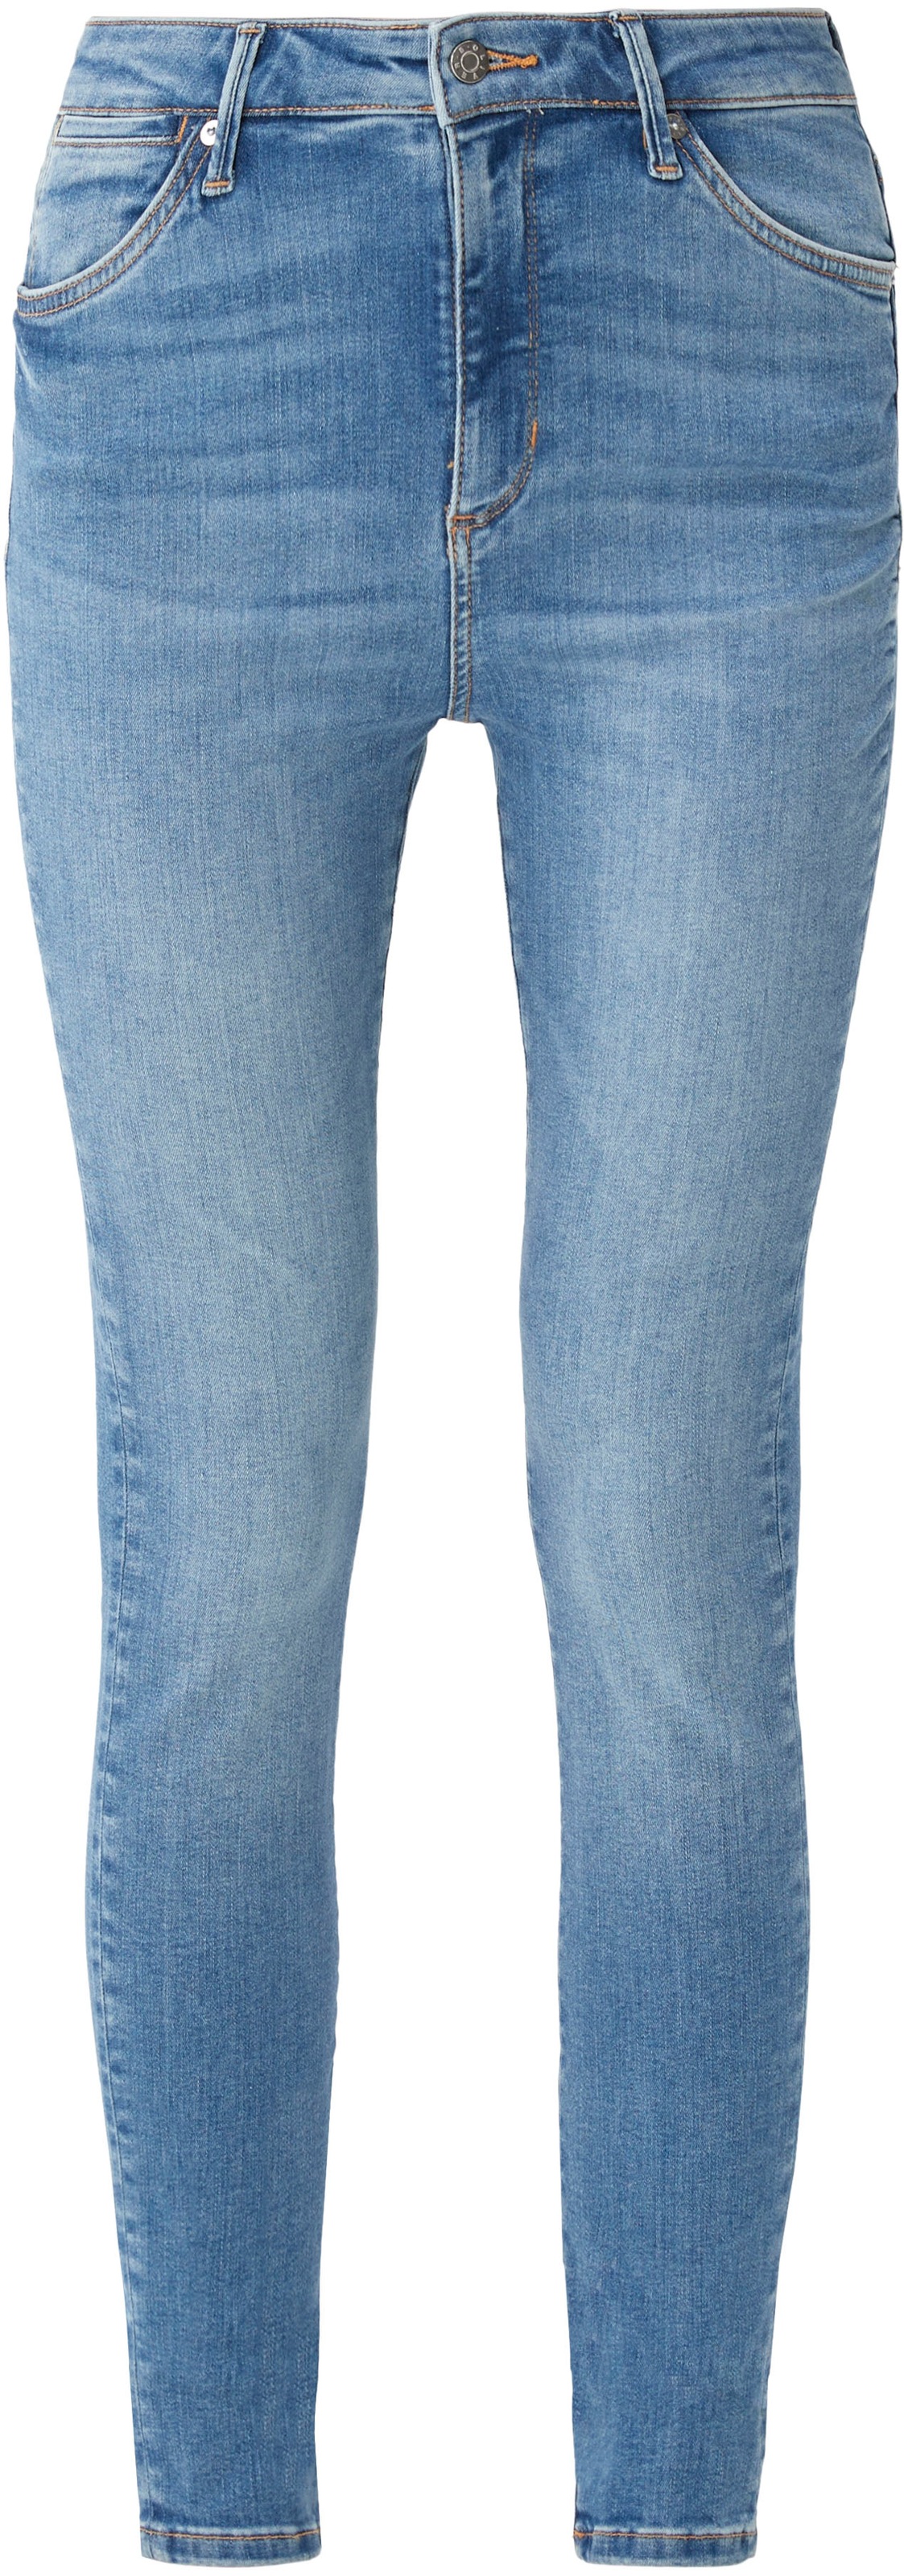 bei High Rise OTTO online »Anny«, Skinny-fit-Jeans s.Oliver